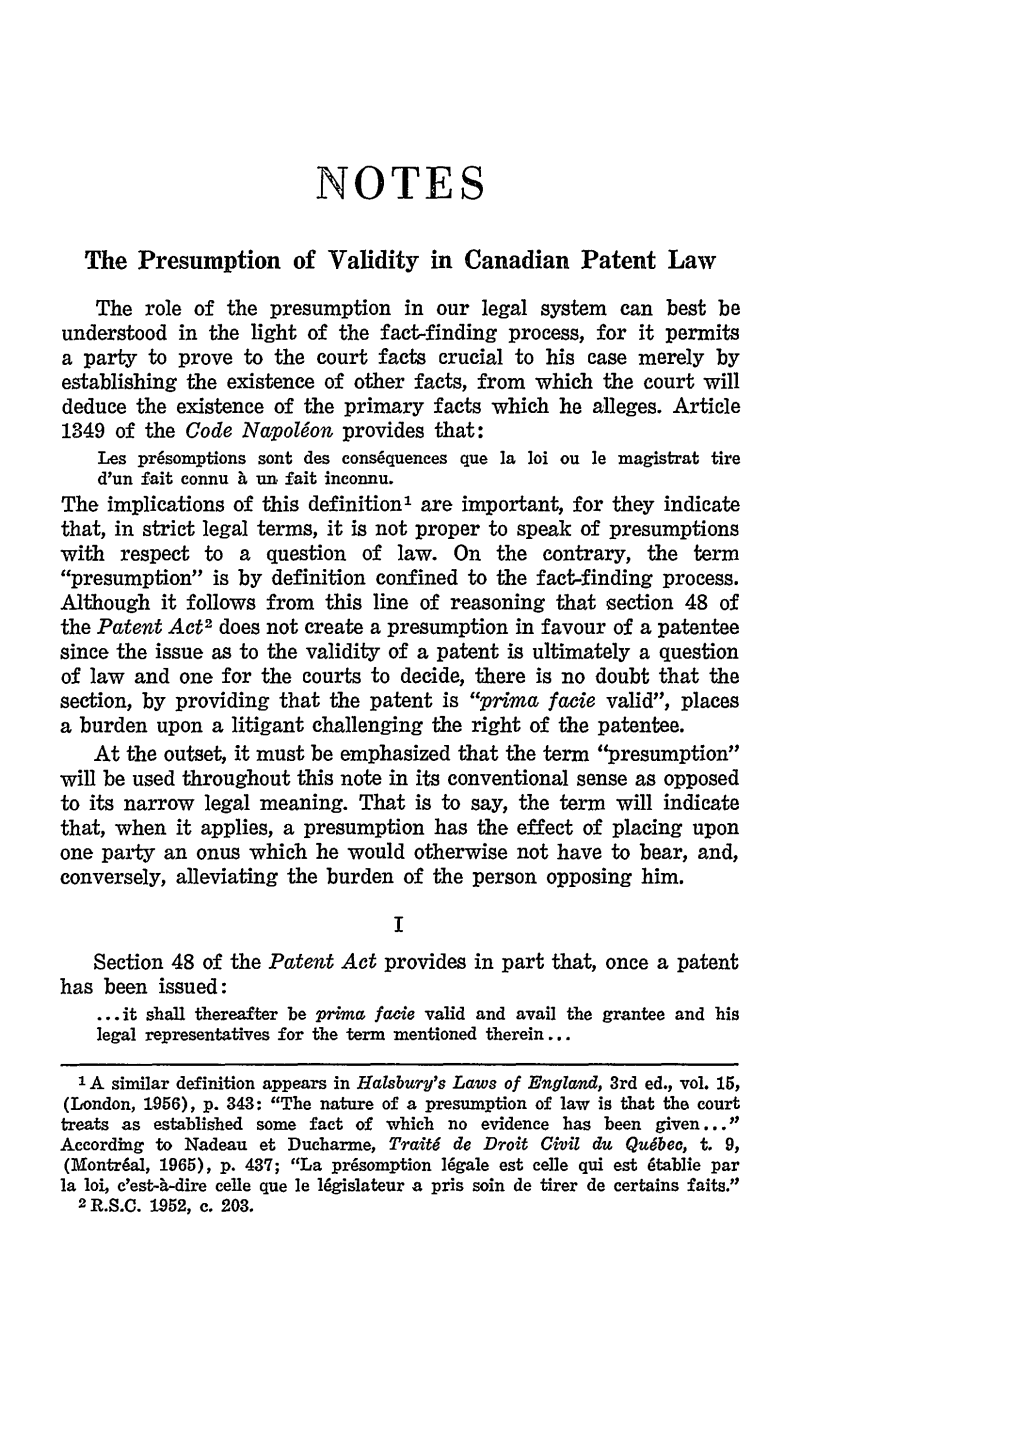 The Presumption of Validity in Canadian Patent Law